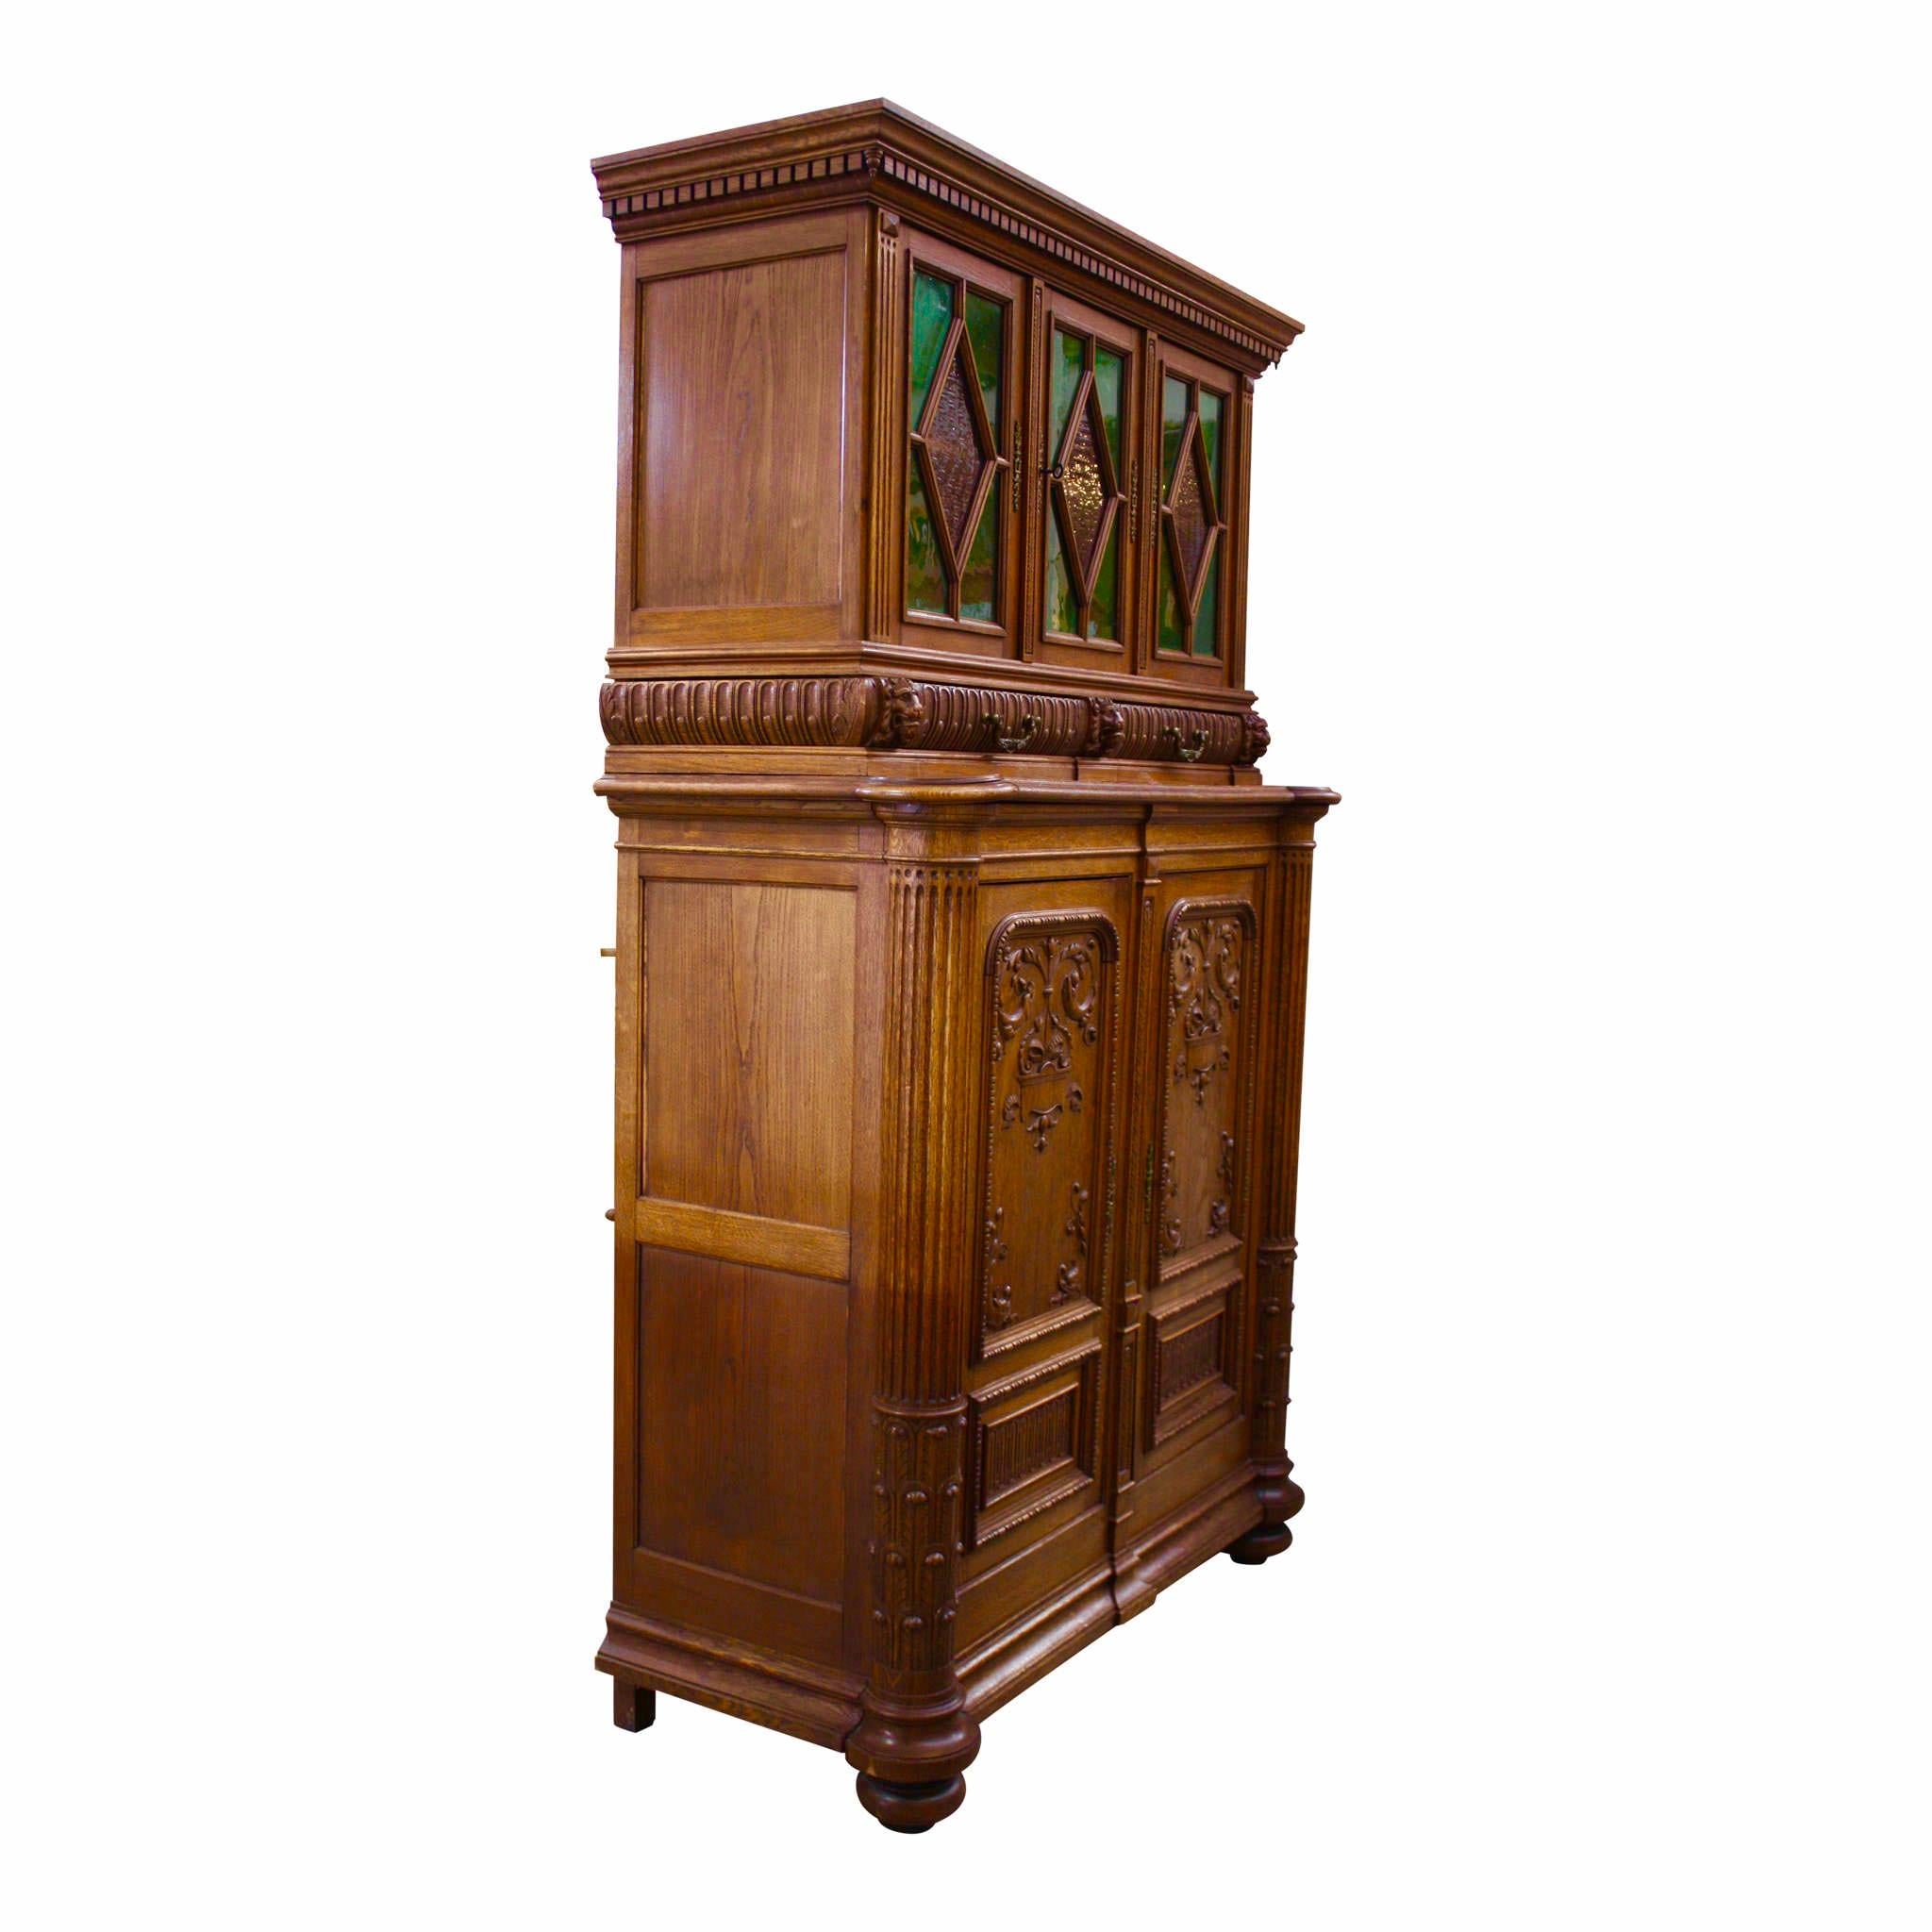 This stunning buffet incorporates the warm tones of oak paired with the rich shades of green and rose glass. The buffet separates into upper and lower cabinets. The upper cabinet features crown molding with dentil trim, three doors with glass panes,